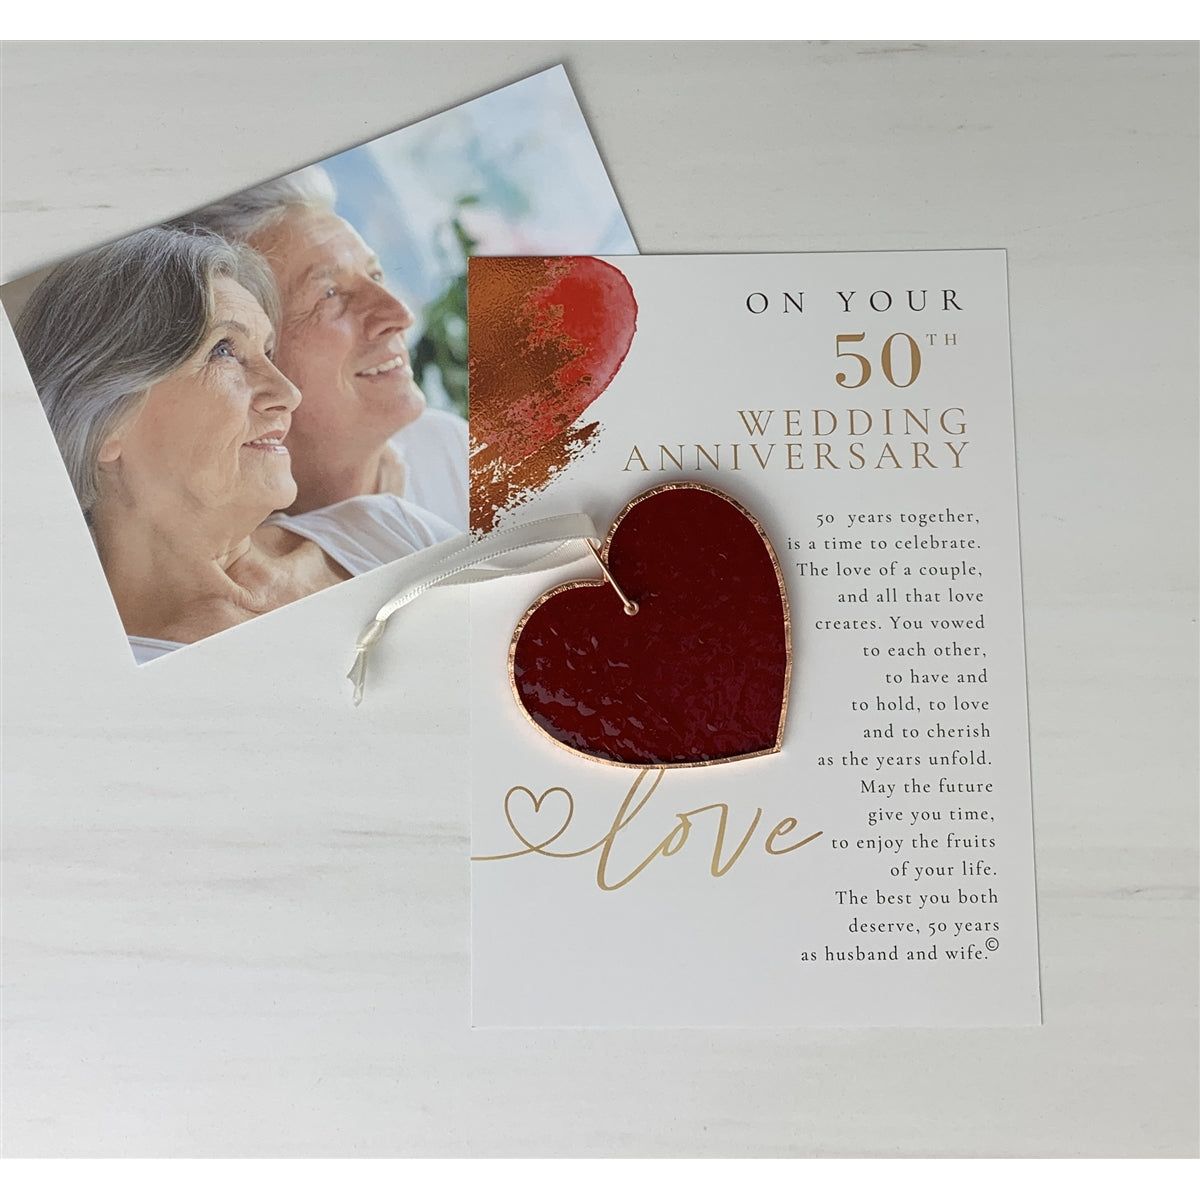 On Your 50th Wedding Anniversary: Glass Heart